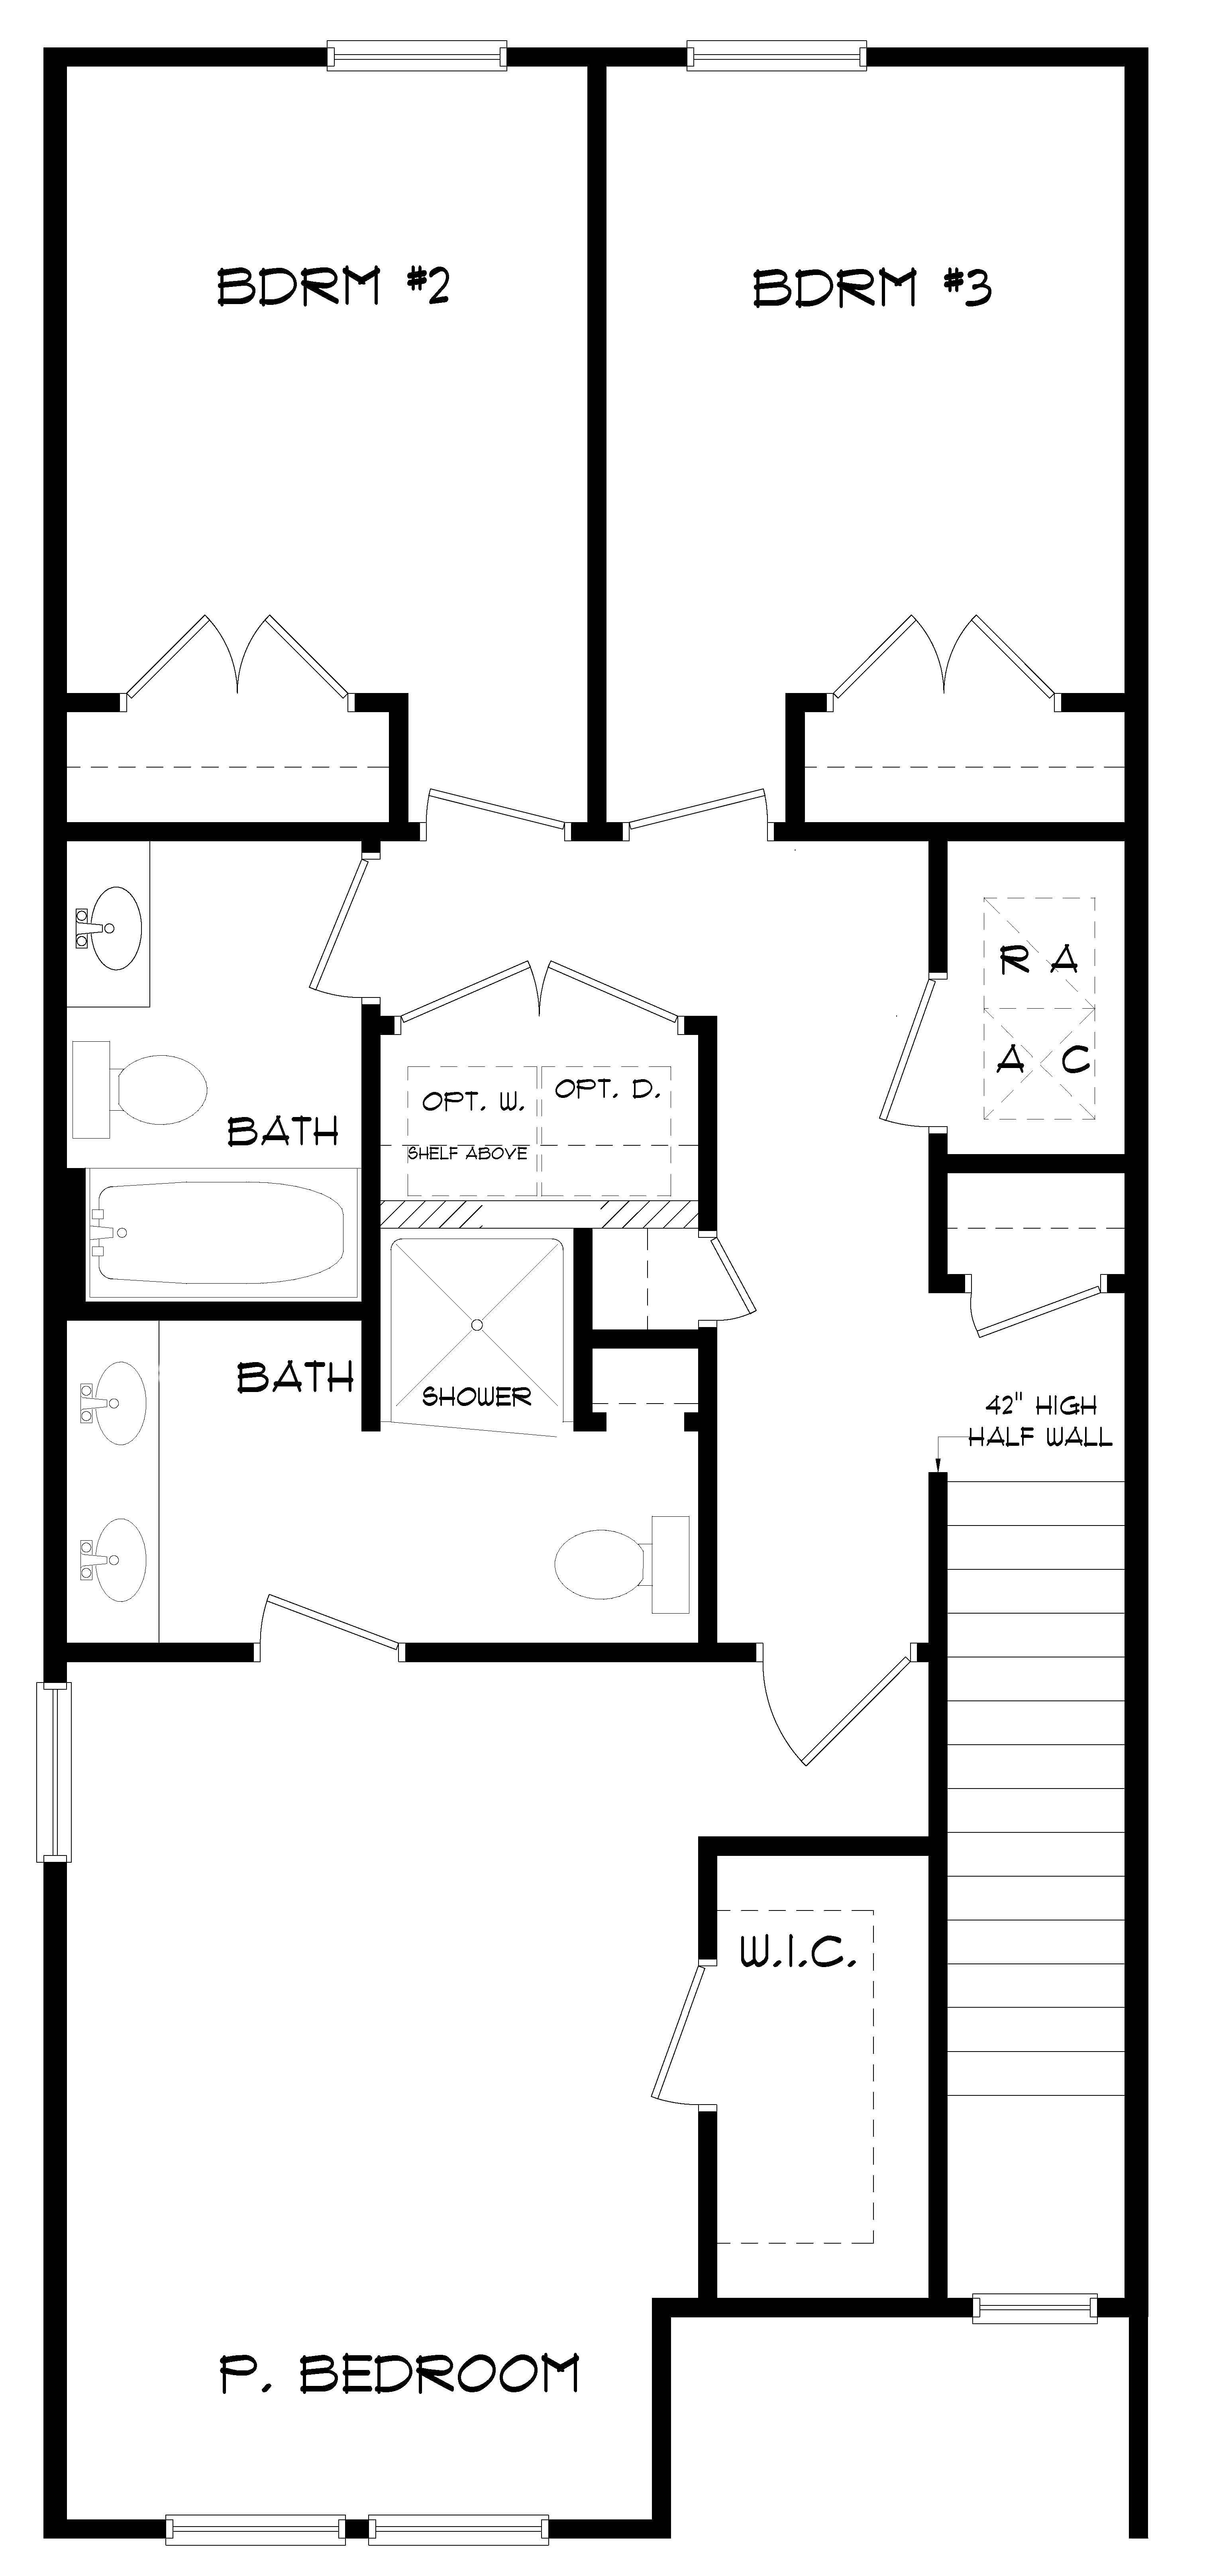 The Palm A townhome second floorplan layout.